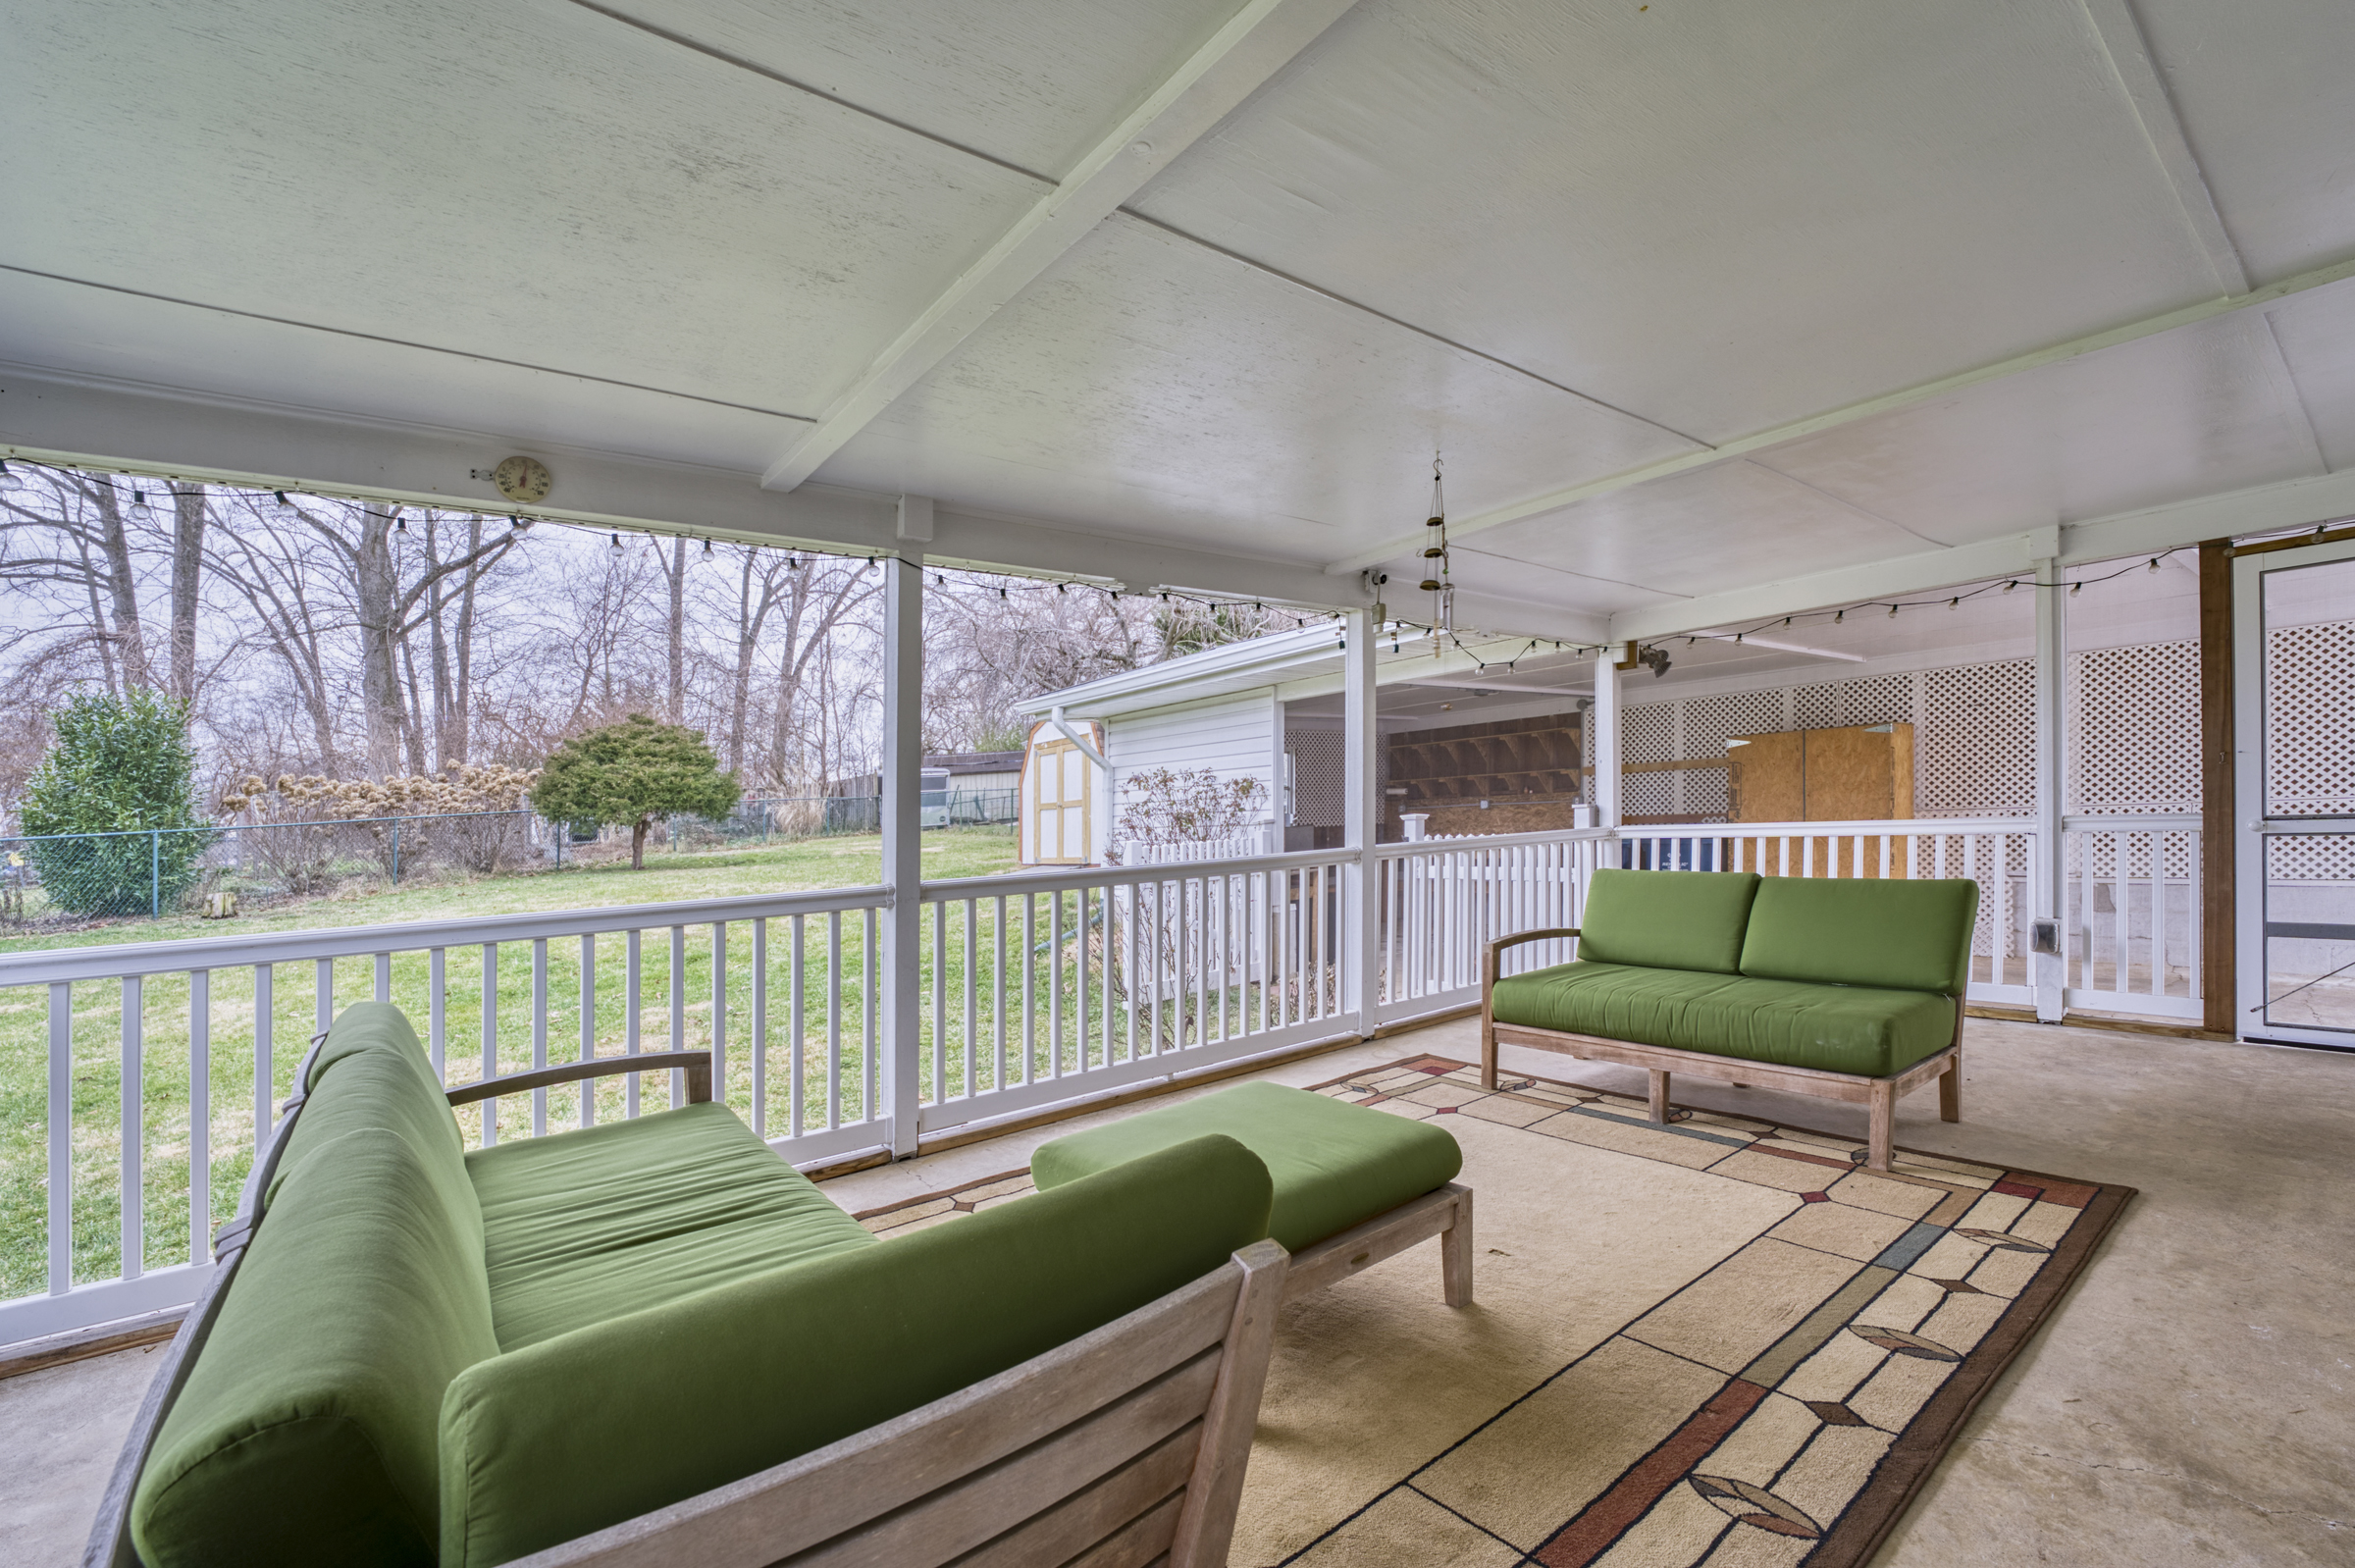 Professional interior photo of 2624 Depaul Dr in Vienna, VA - showing the screened porch looking over the flat backyard